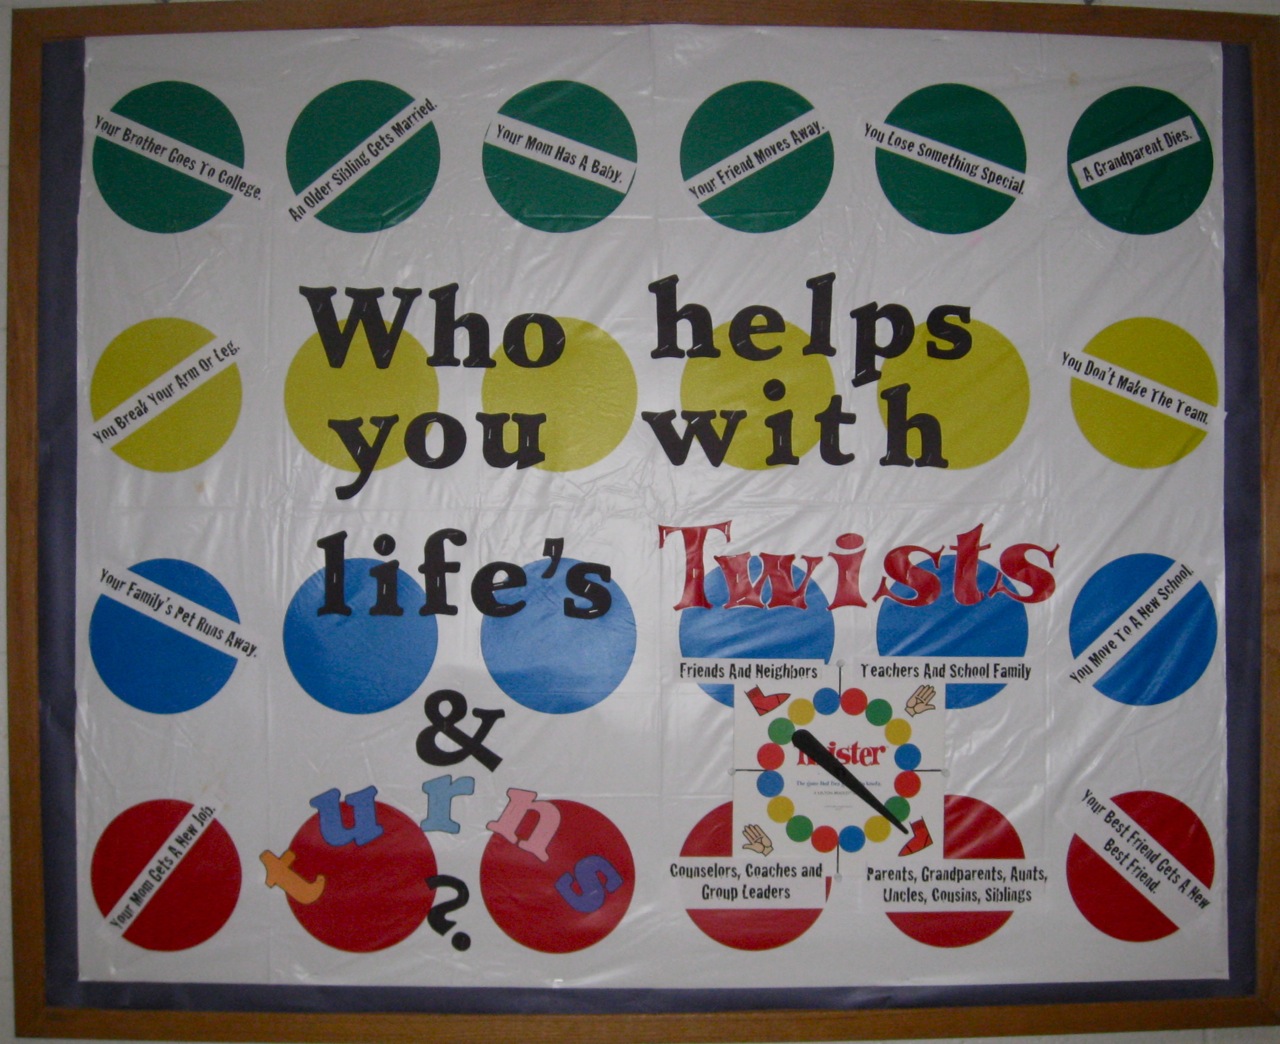 Game Board for The Game of Life - Twists & Turns